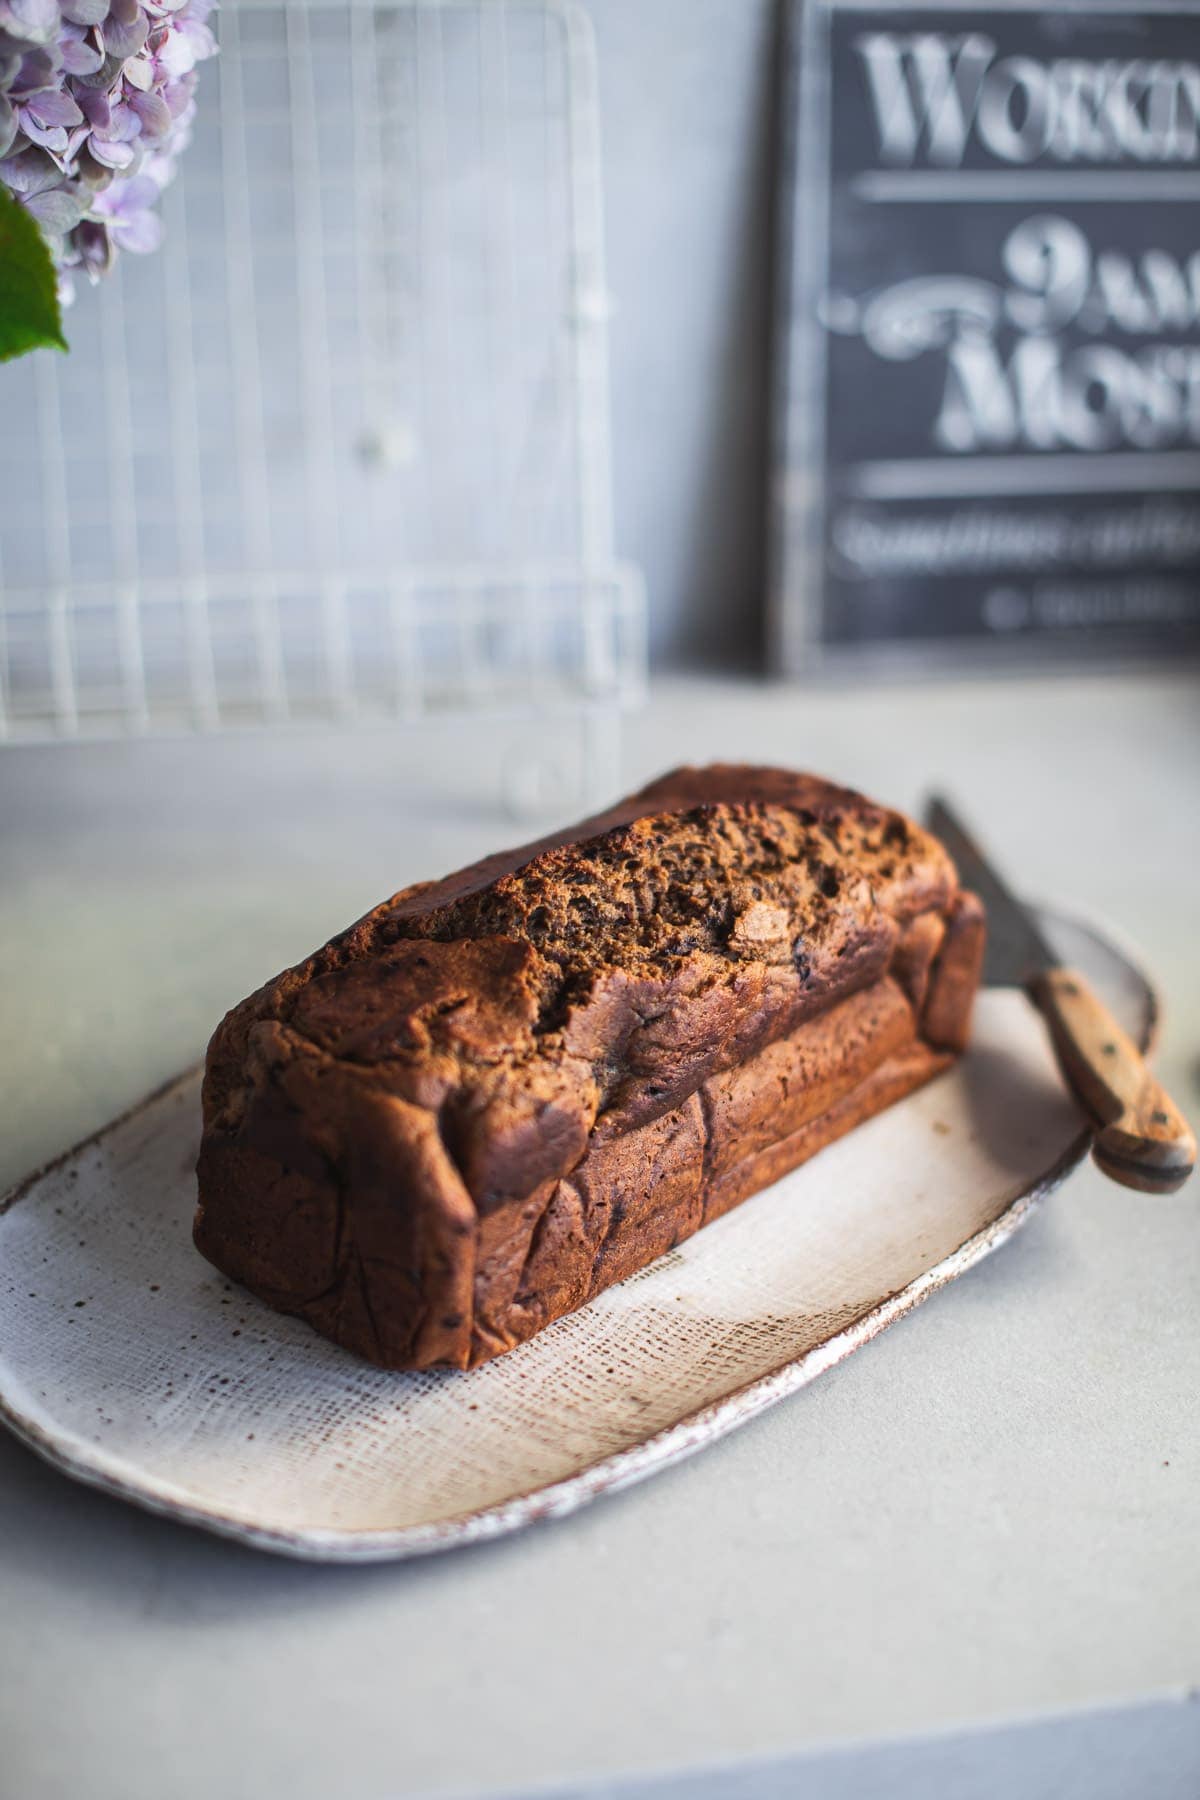 A loaf of baked Coffee Banana Bread on a plate with a knife resting next to it.